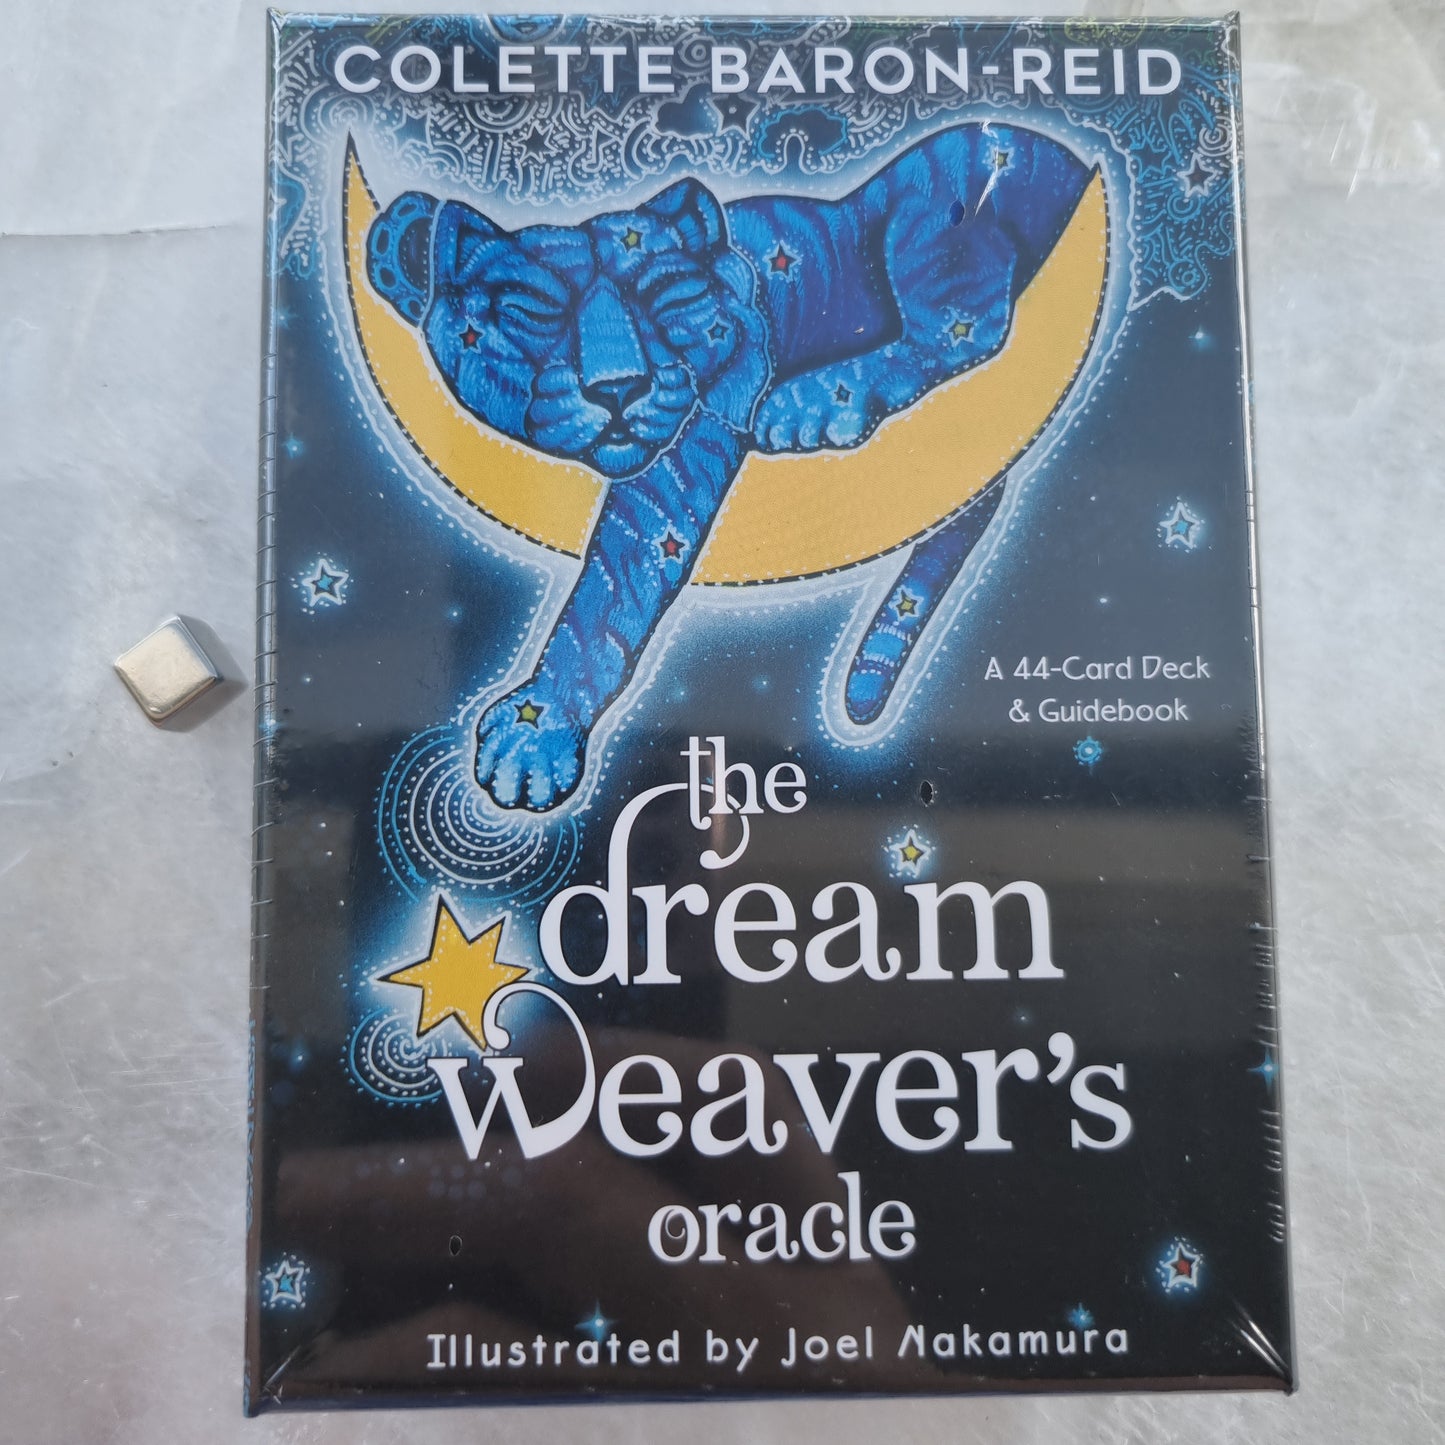 The dream weaver's oracle